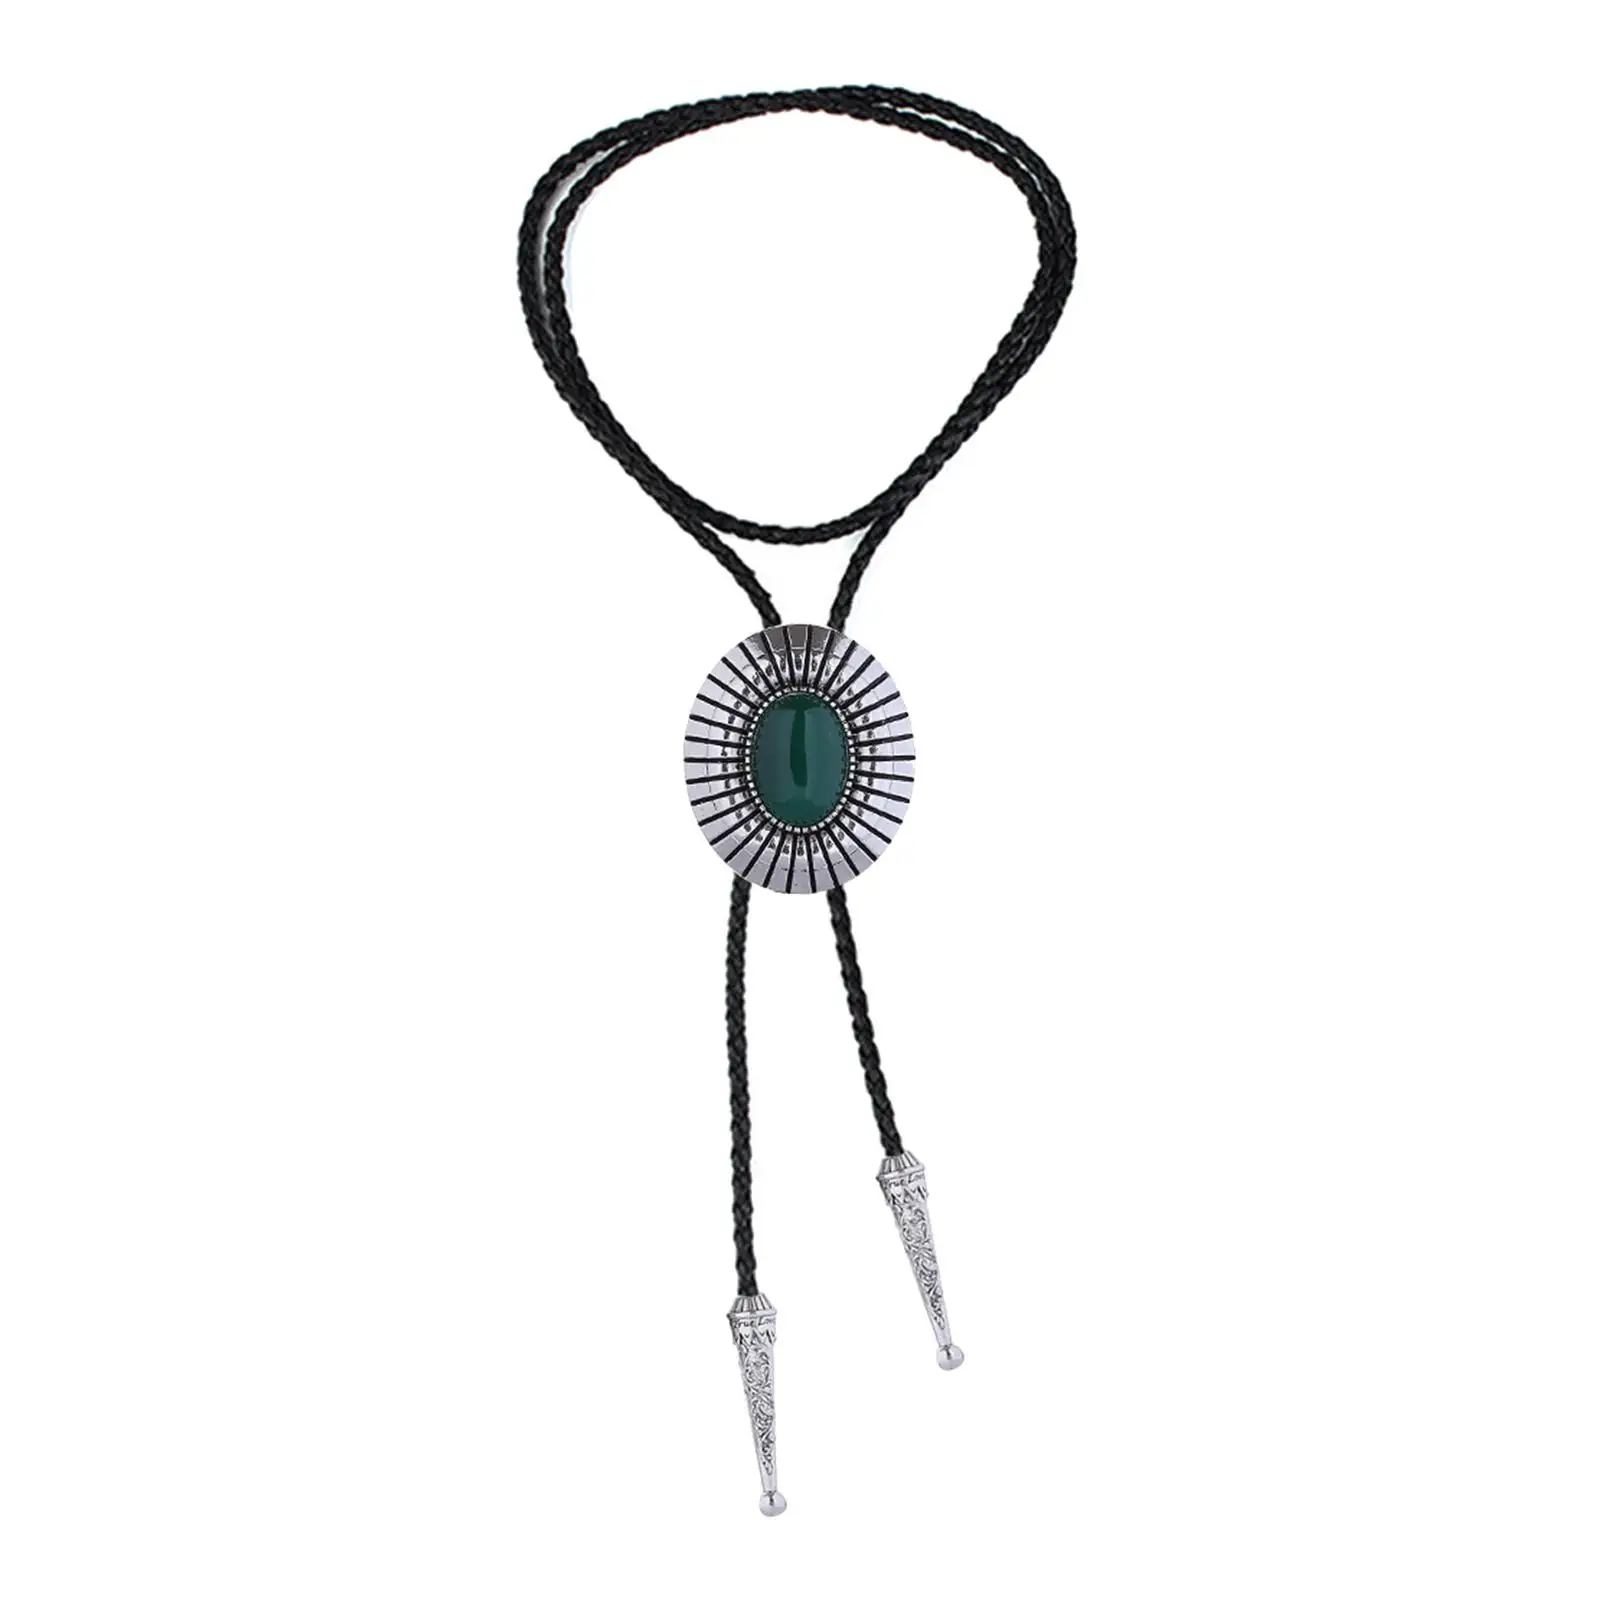 Bolo Tie Necktie Vintage Costume Alloy Rodeo PU Leather Gift Oval Adjustable Retro American Necklace for Party Men